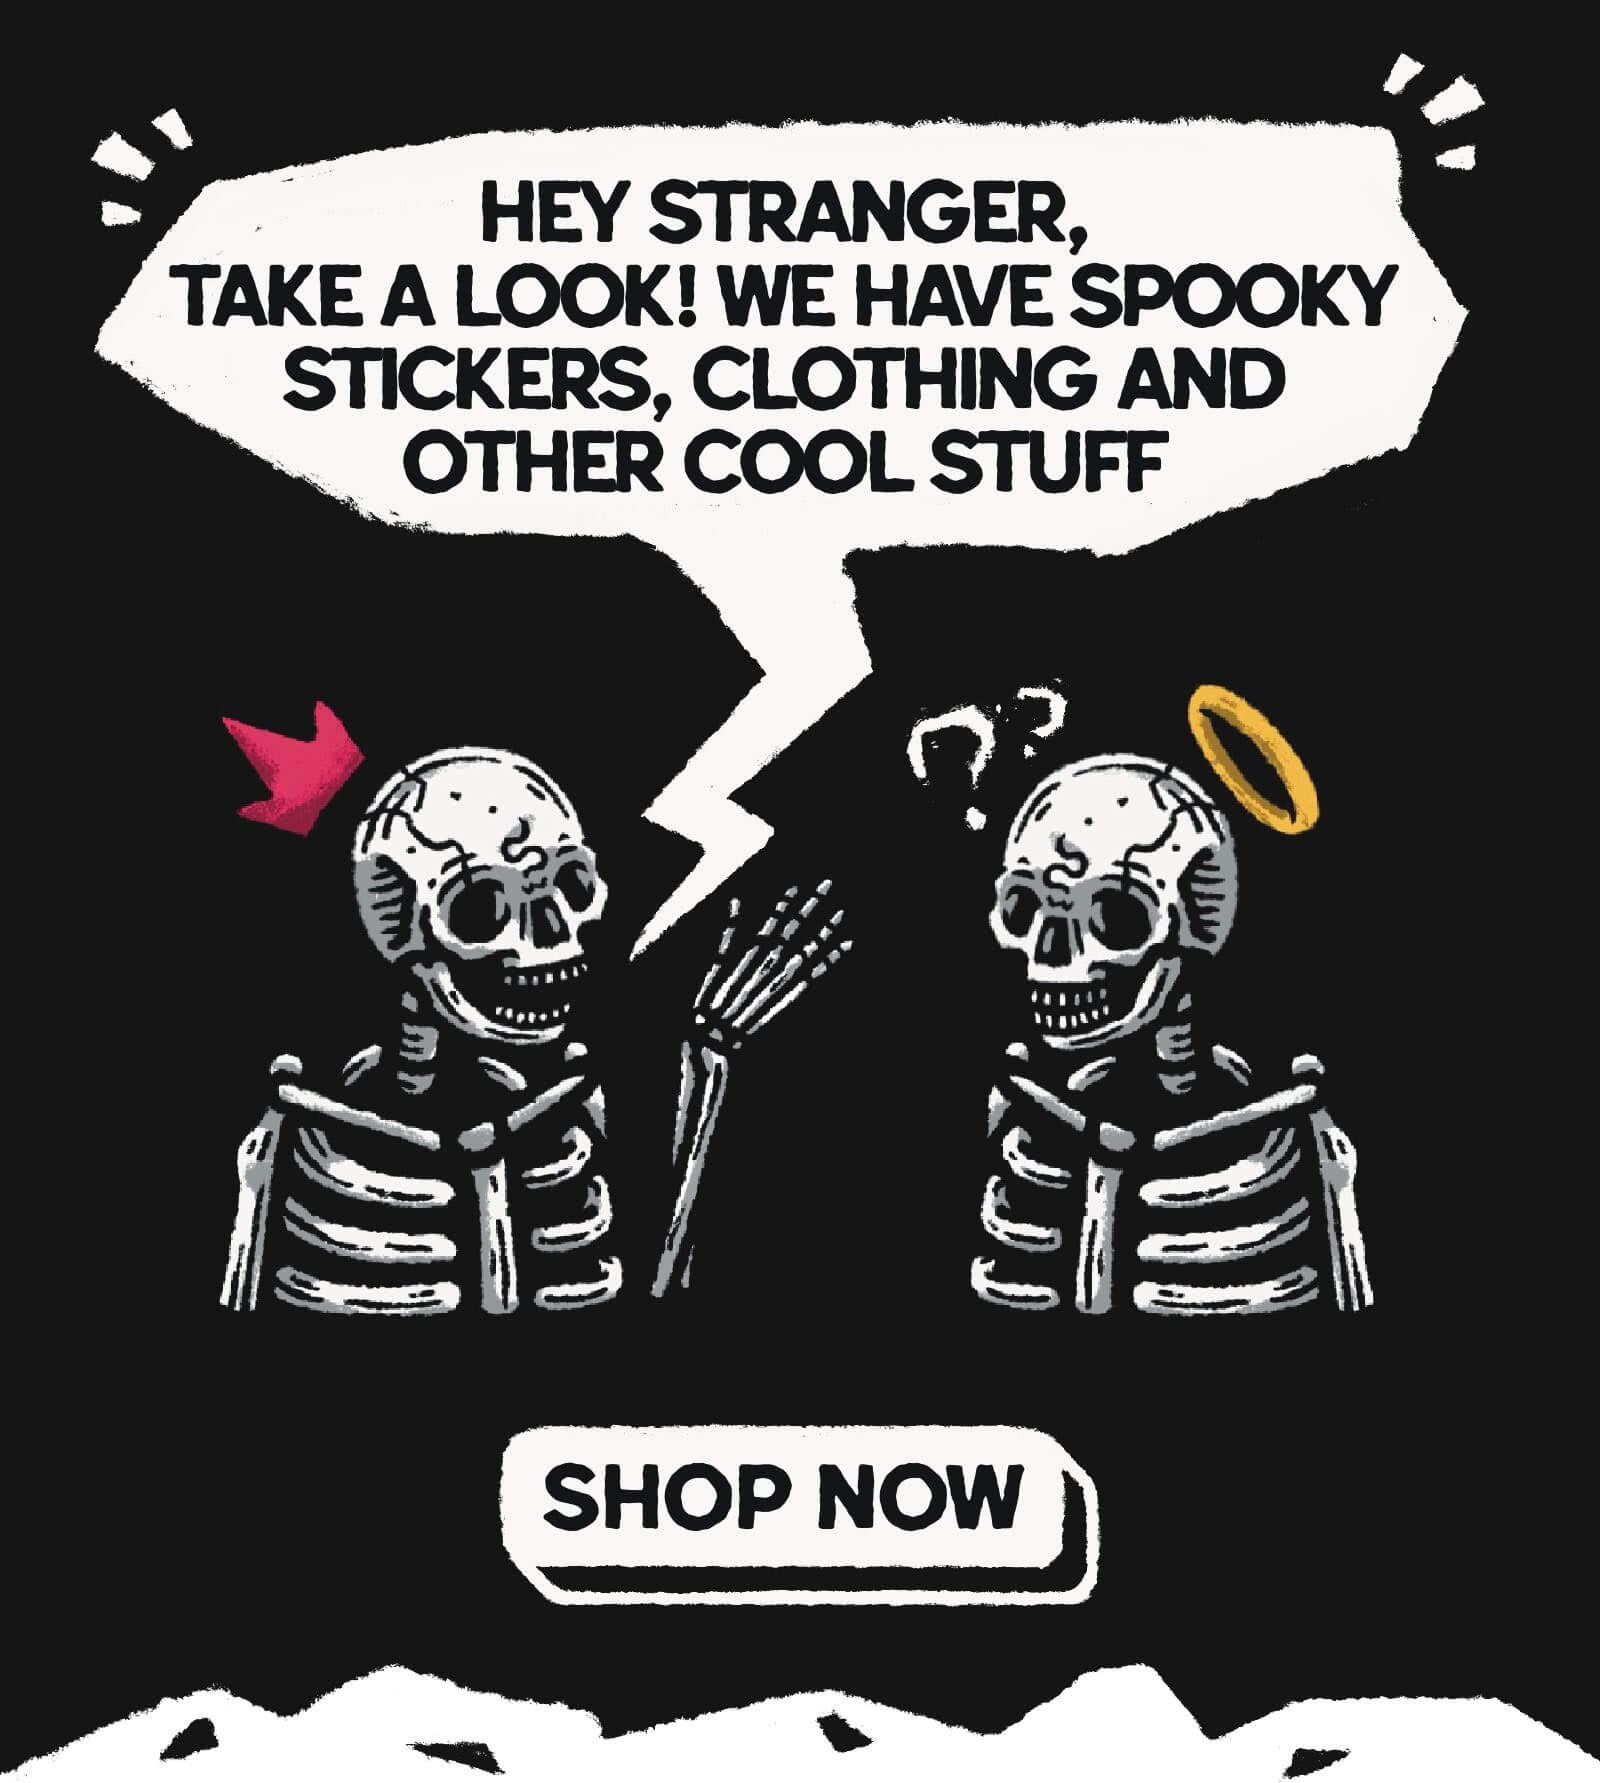 Spooky stickers, clothing and other cool stuff